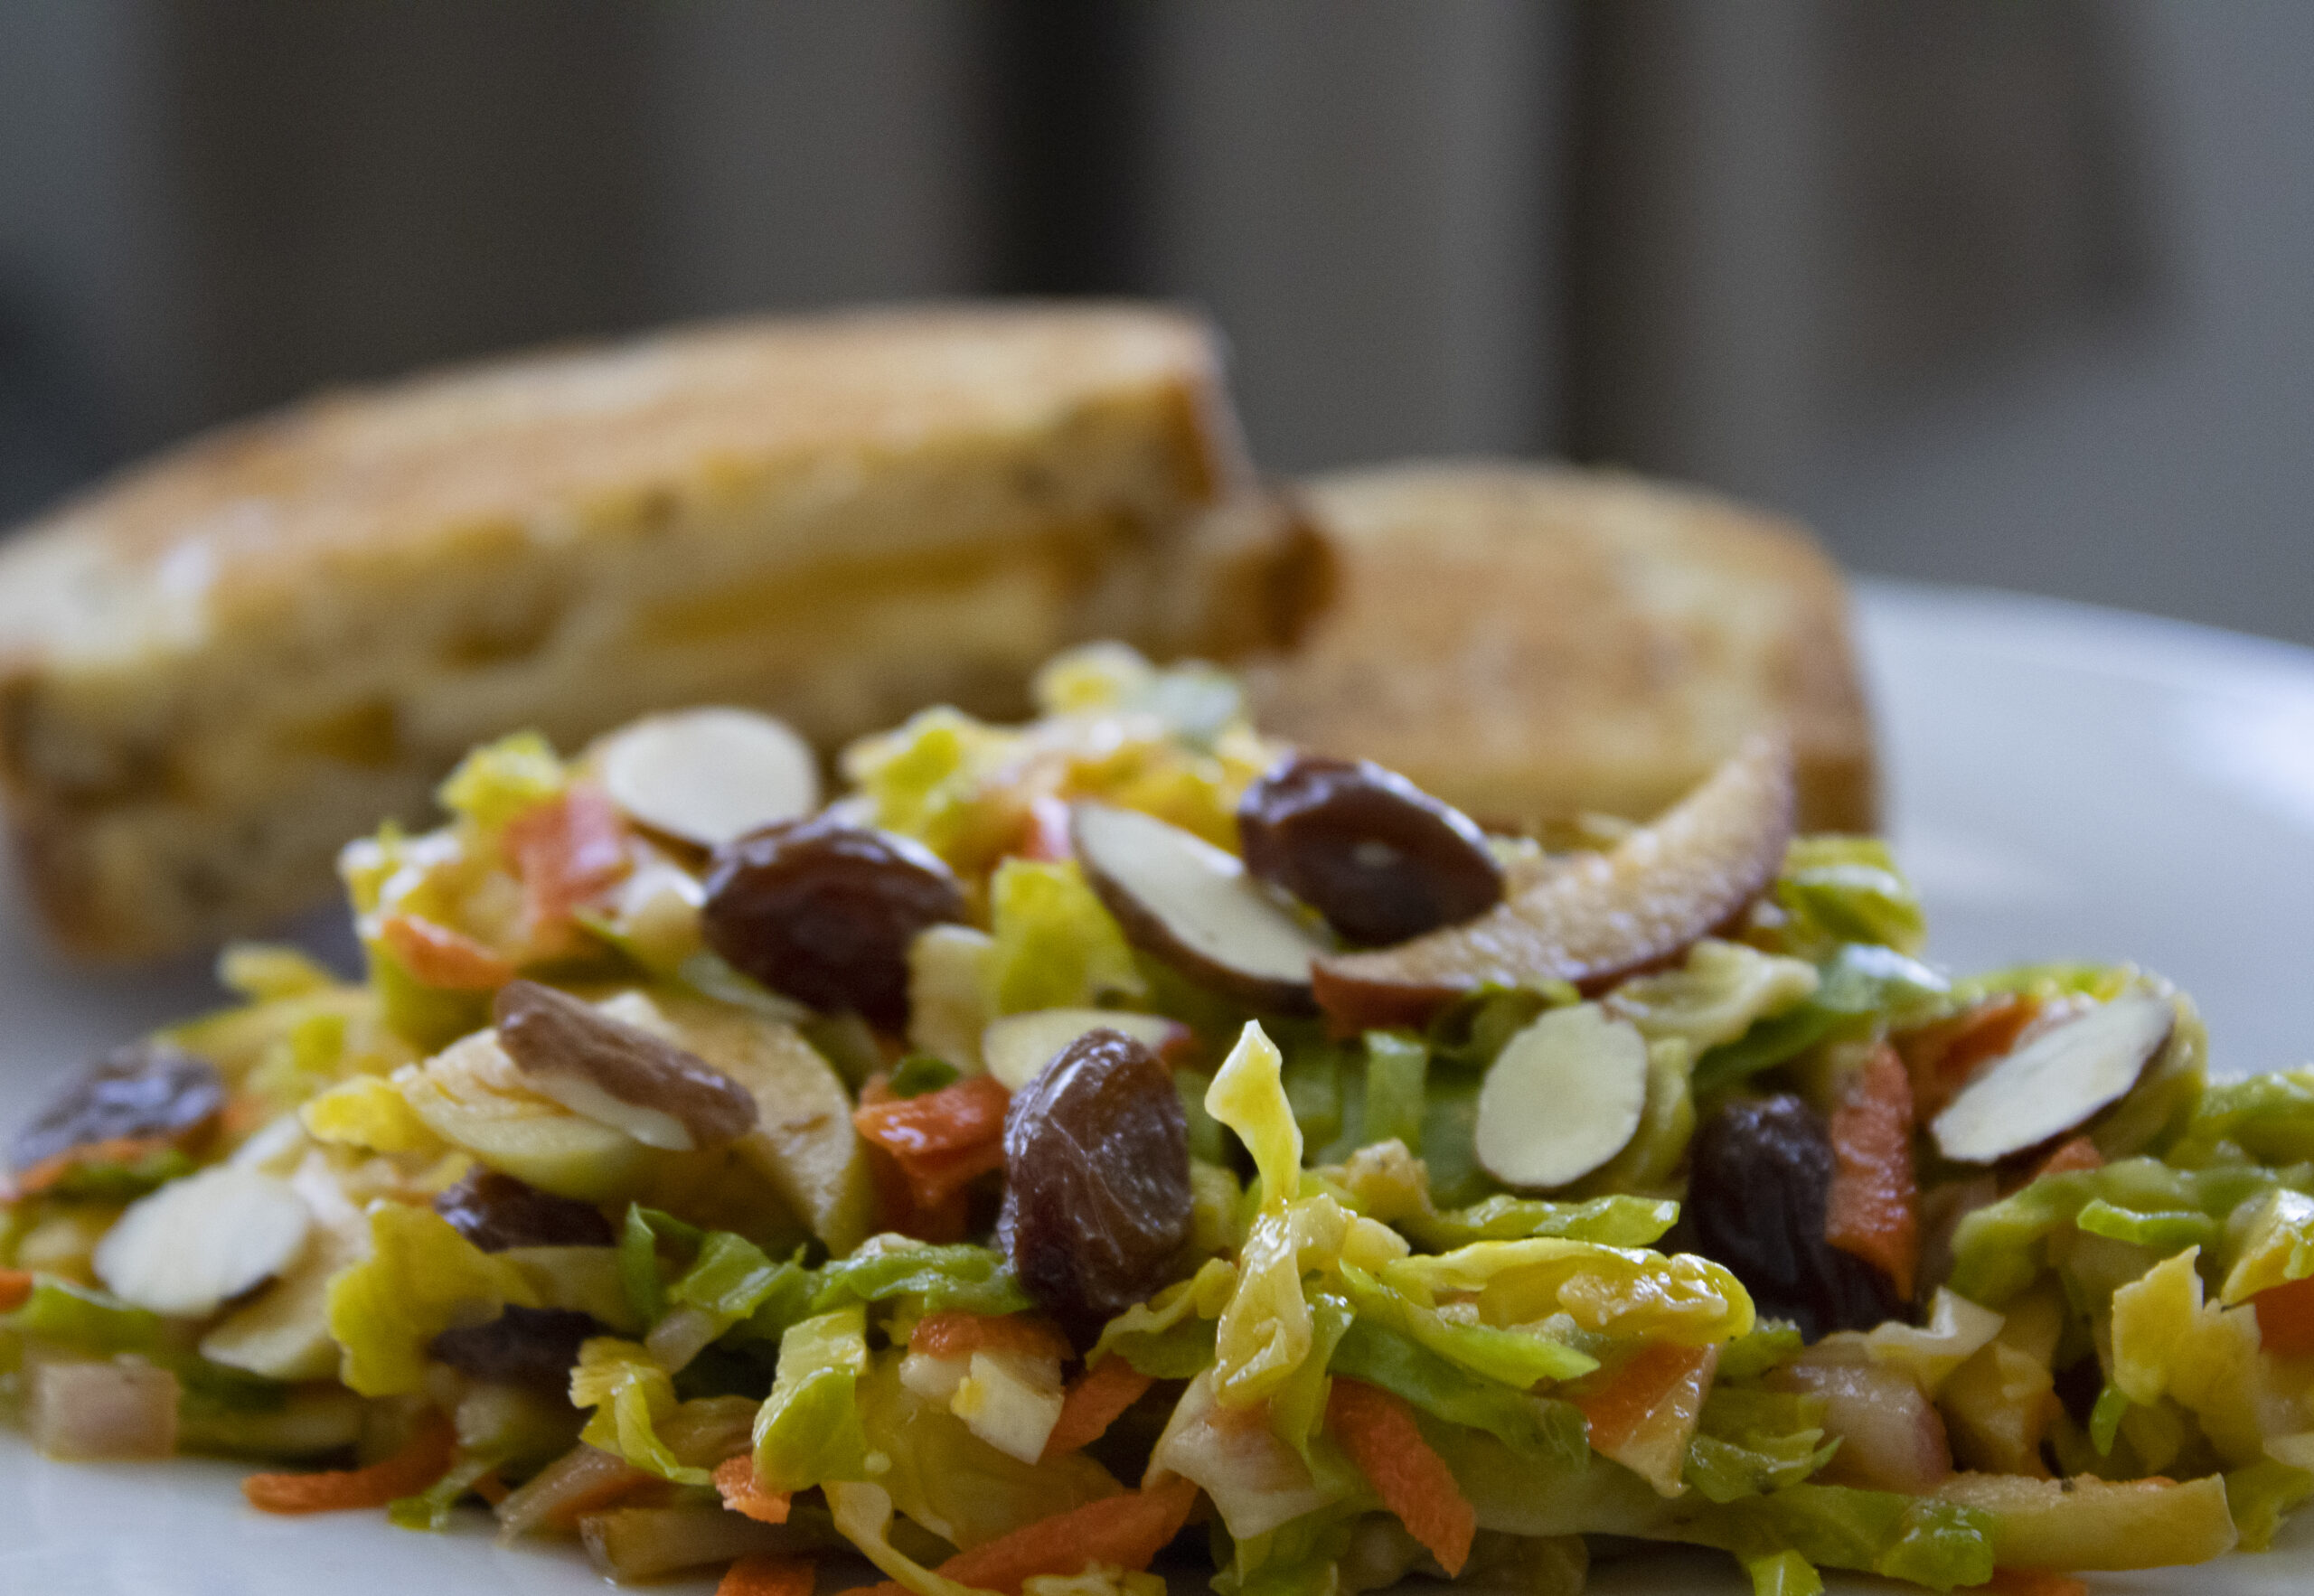 Autumn Slaw with Sautéed Brussels Sprouts